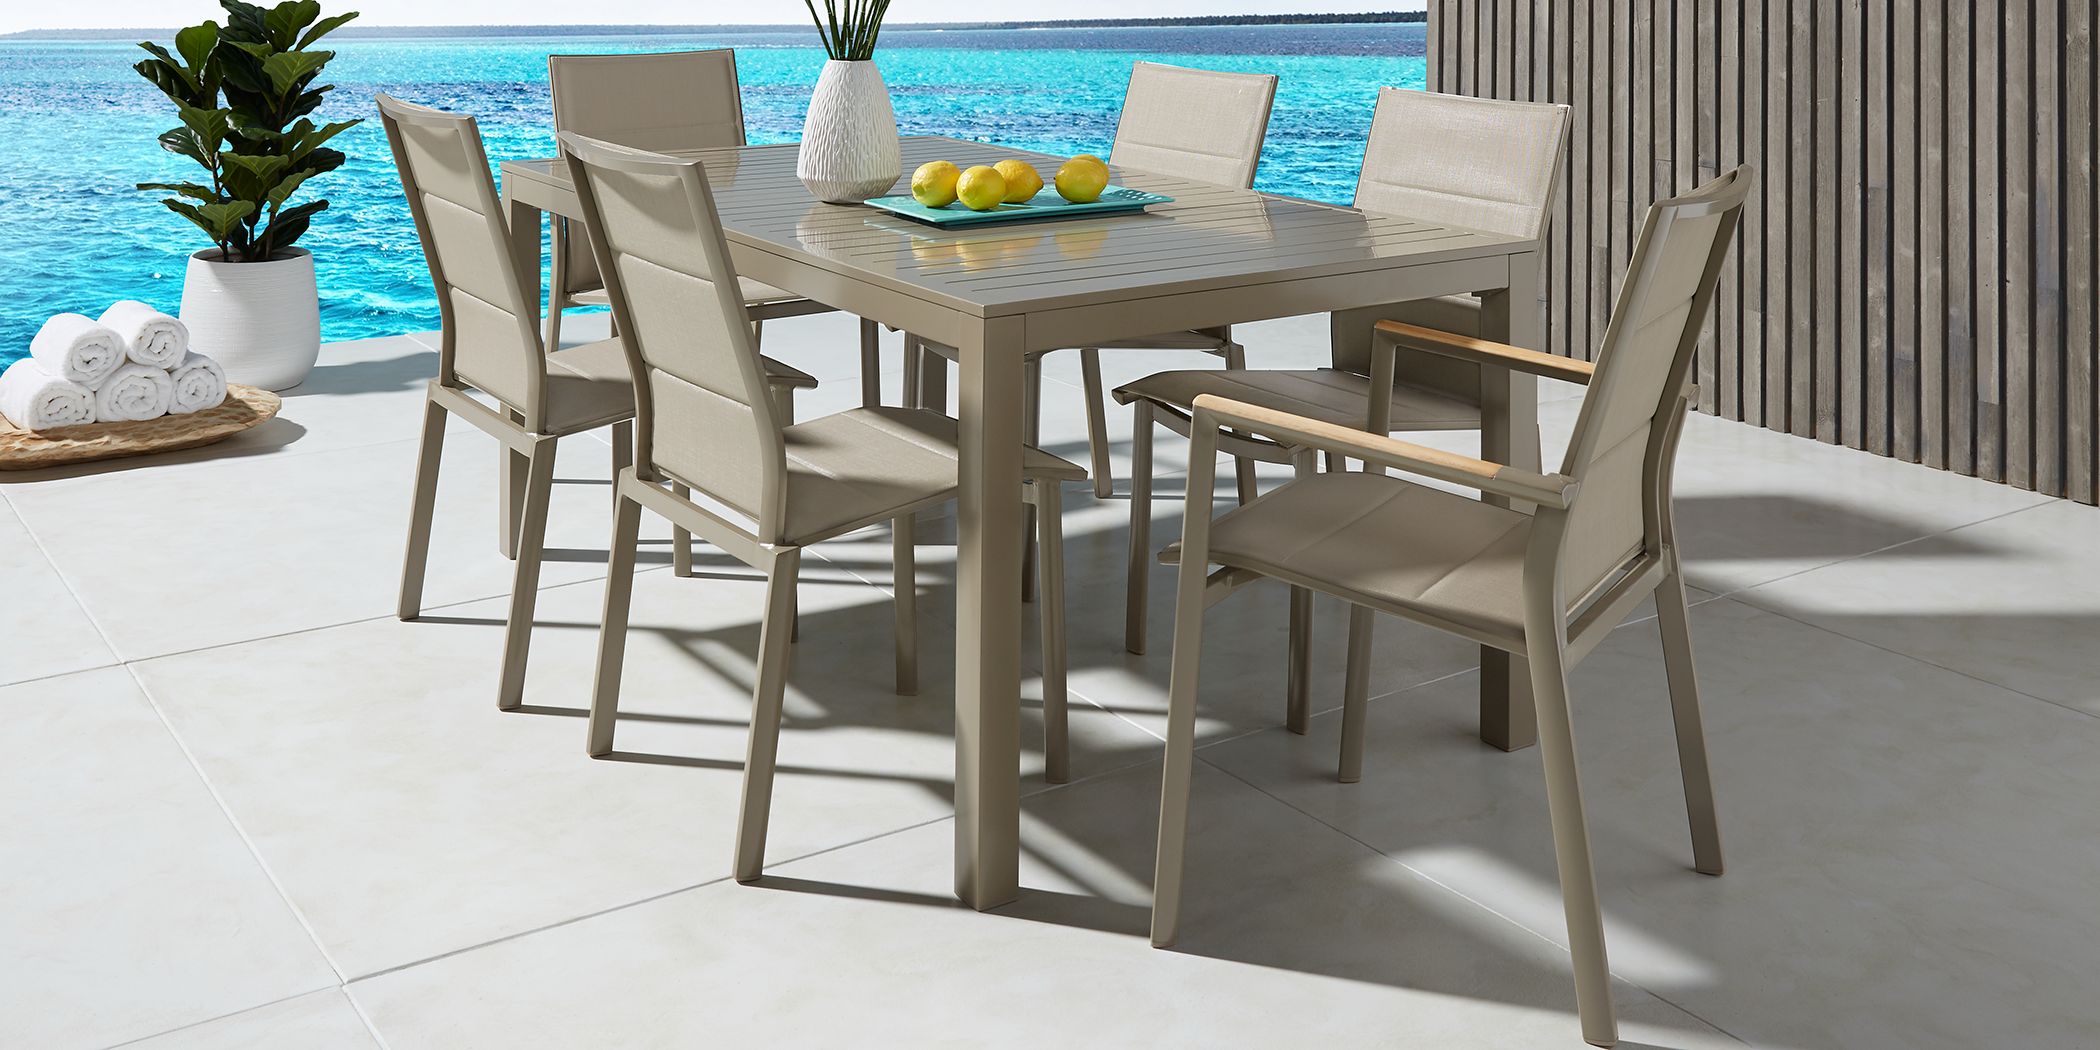 Solana Taupe 5 Pc 70 in. Rectangle Outdoor Dining Set